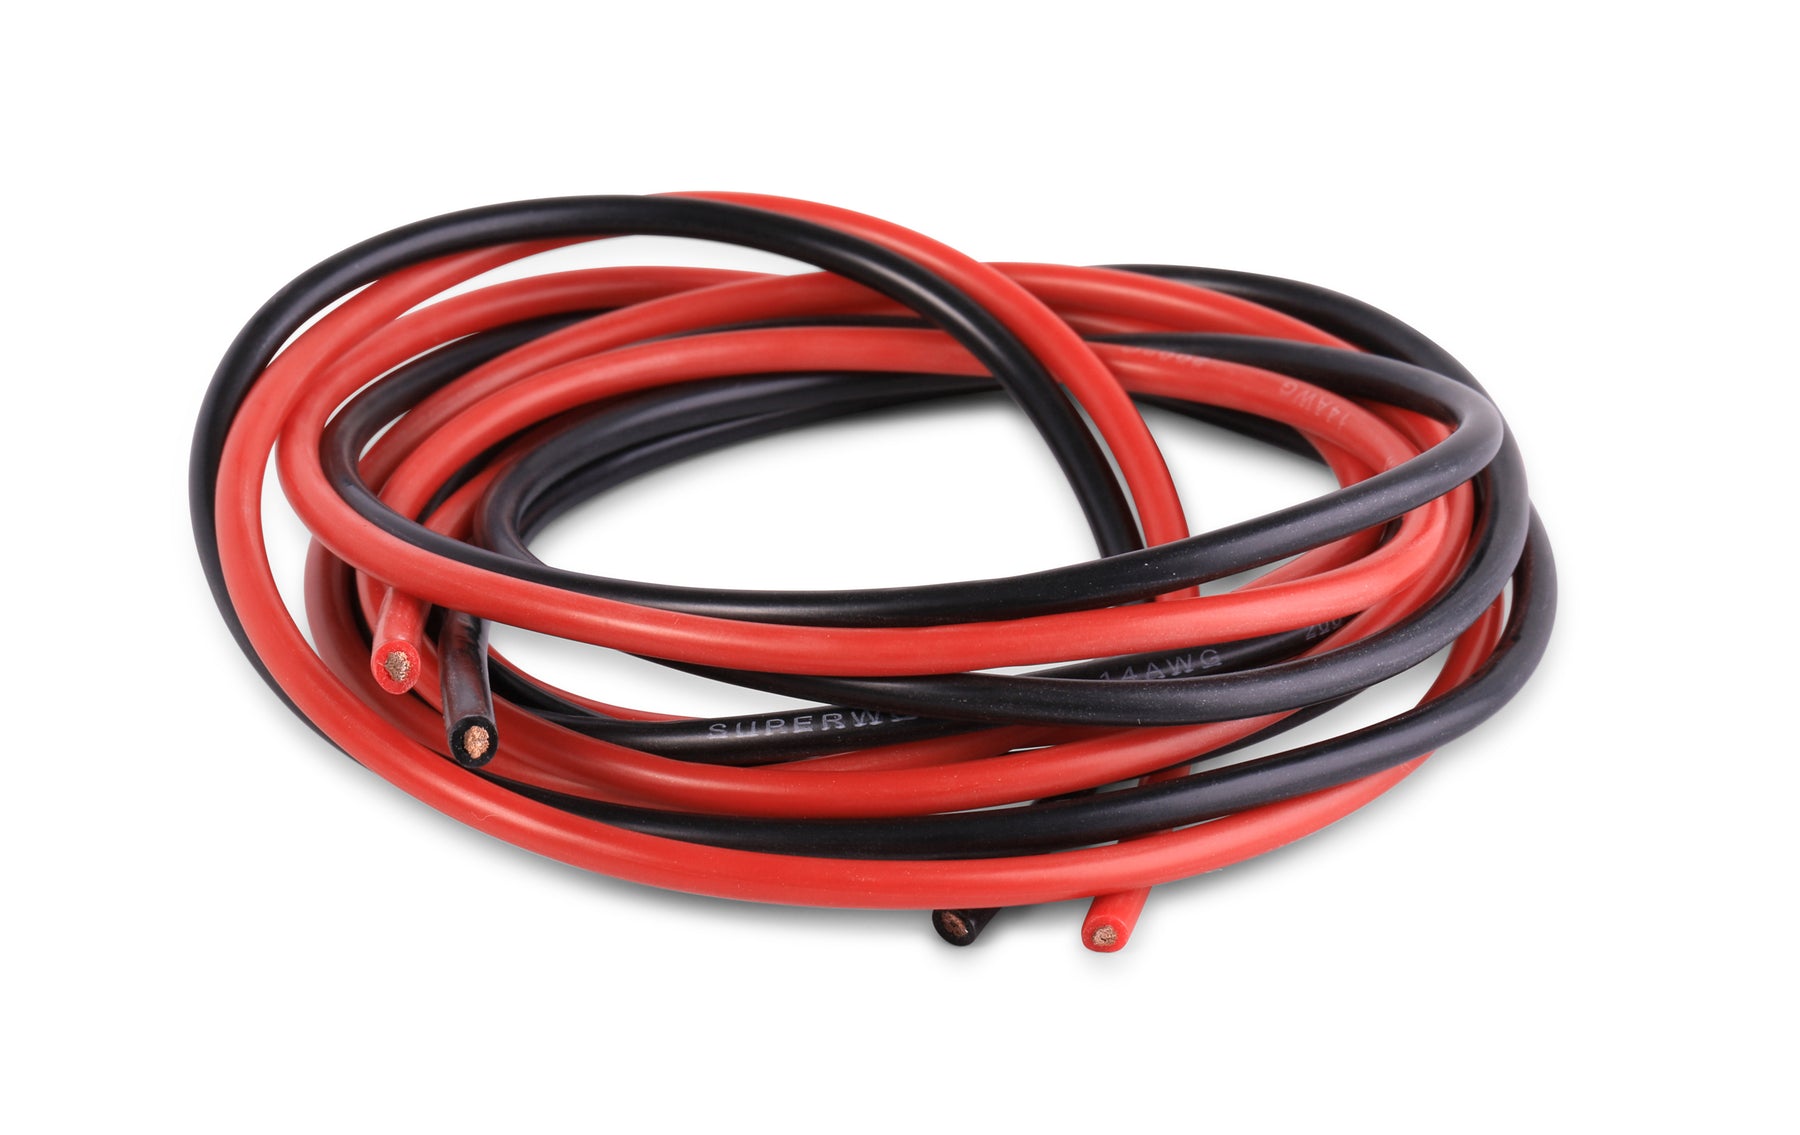 Acer Racing Superworm Silicone Wire 14 Gauge 10' SUP04